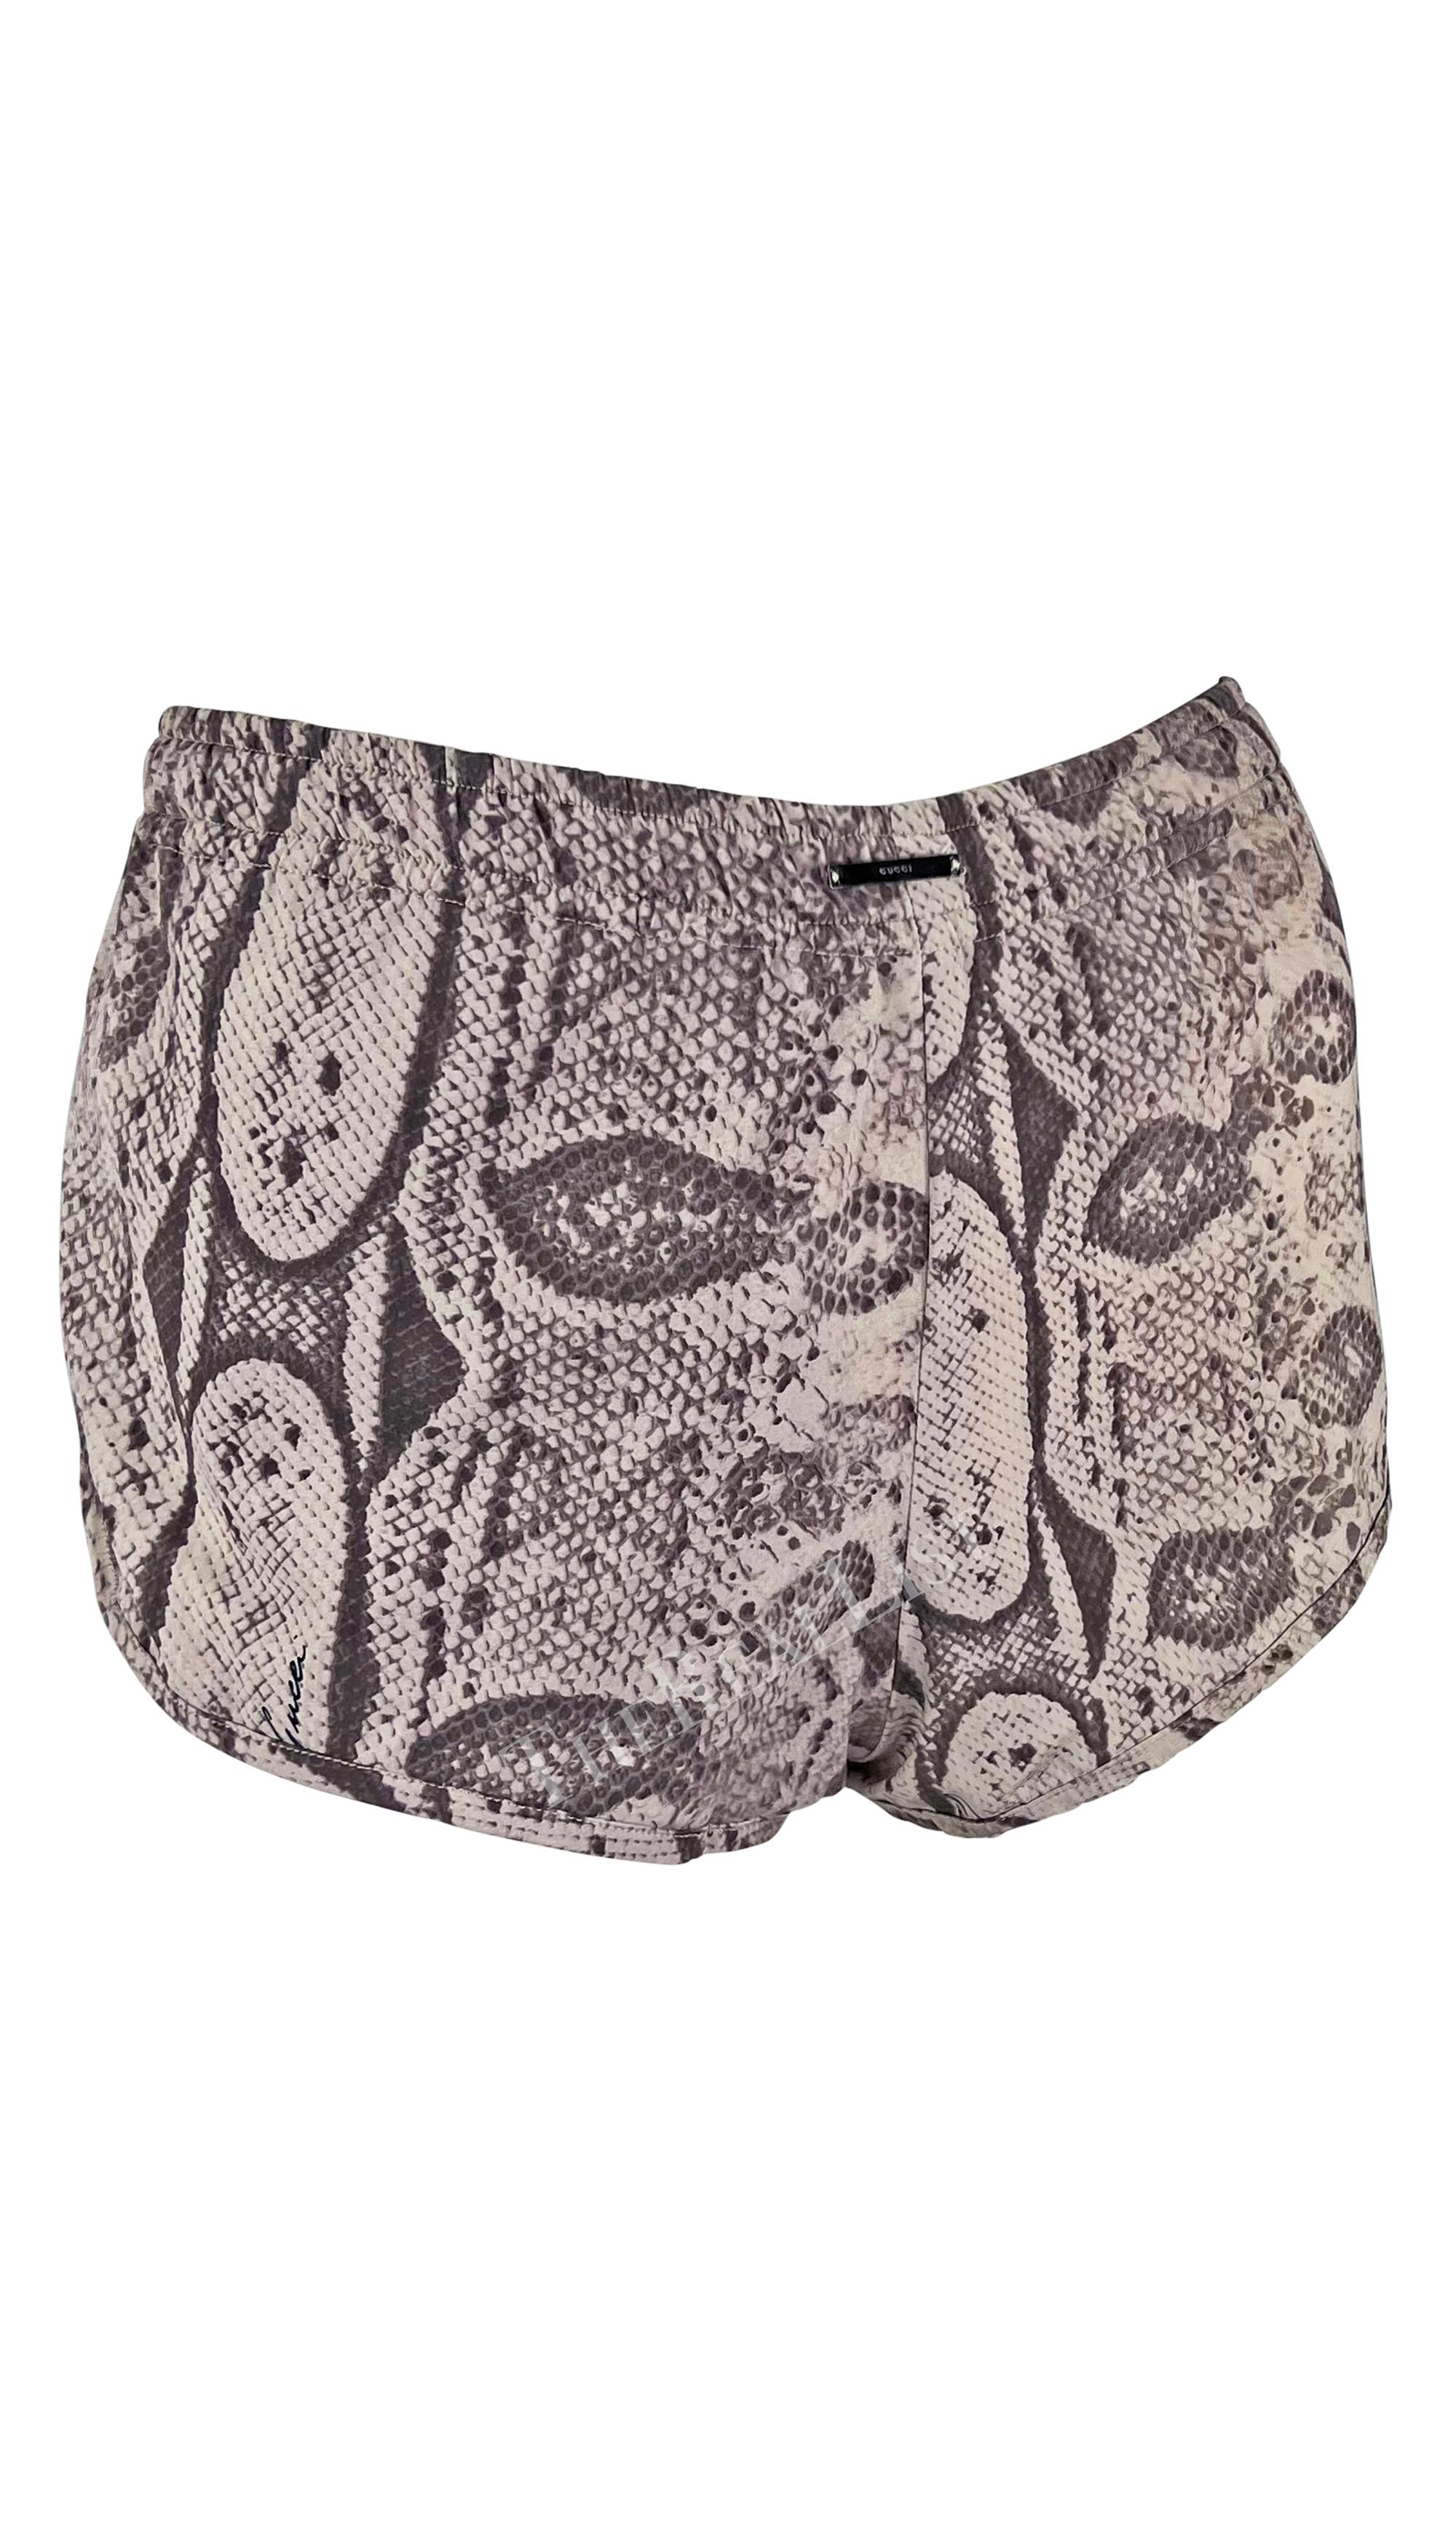 S/S 2000 Gucci by Tom Ford Runway Snake Skin Print Mini Shorts For Sale 7